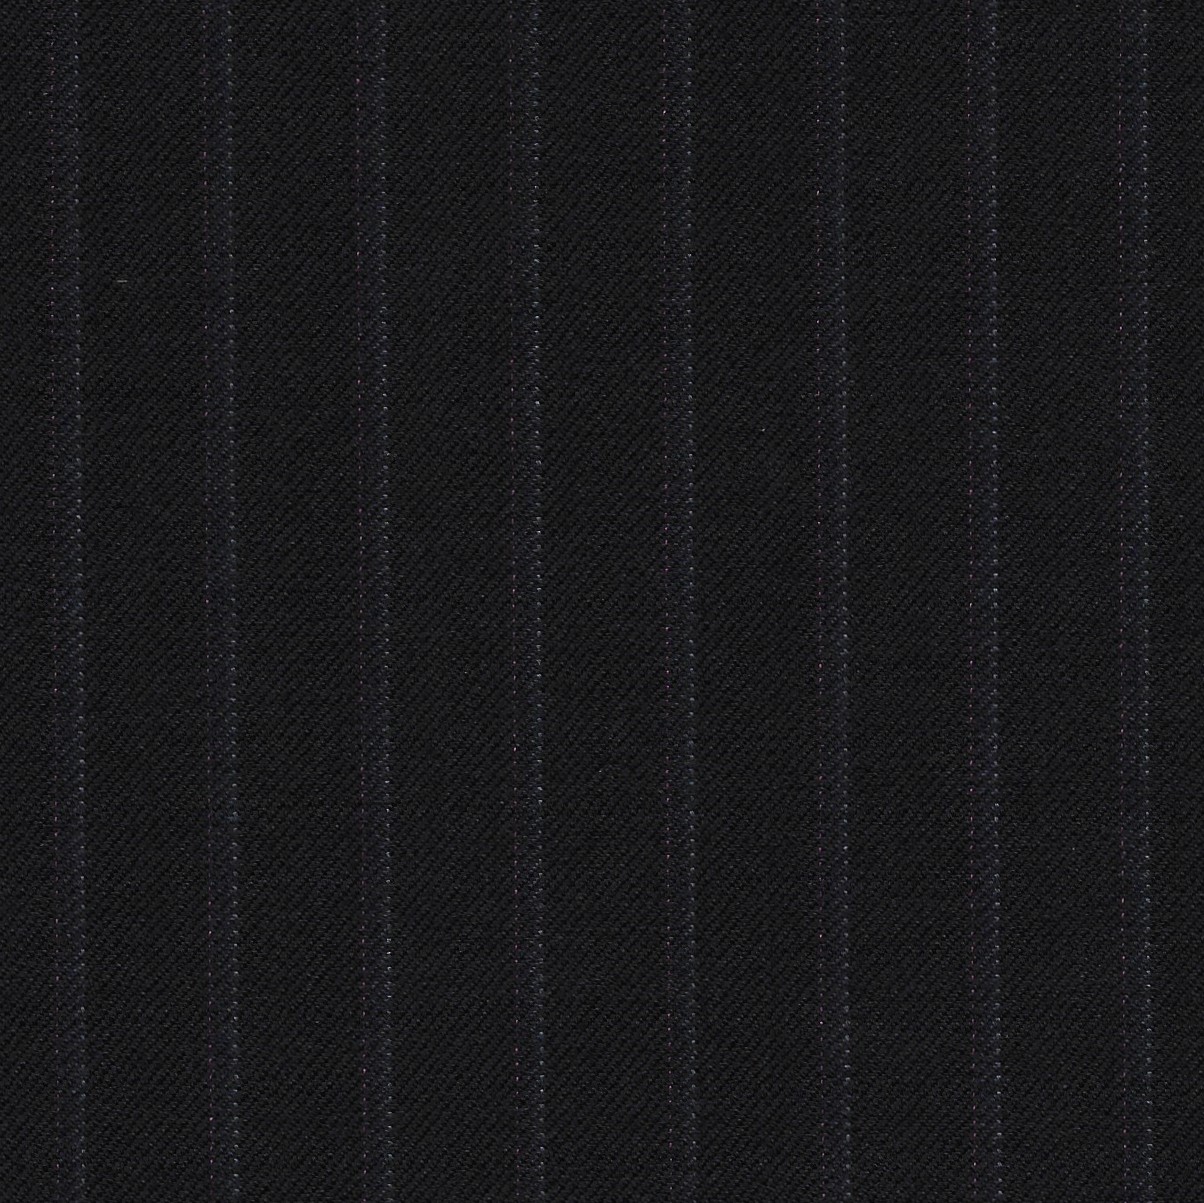 dormeuil-amadeus-pure-wool-super-100s-navy-blue-with-stripes-3